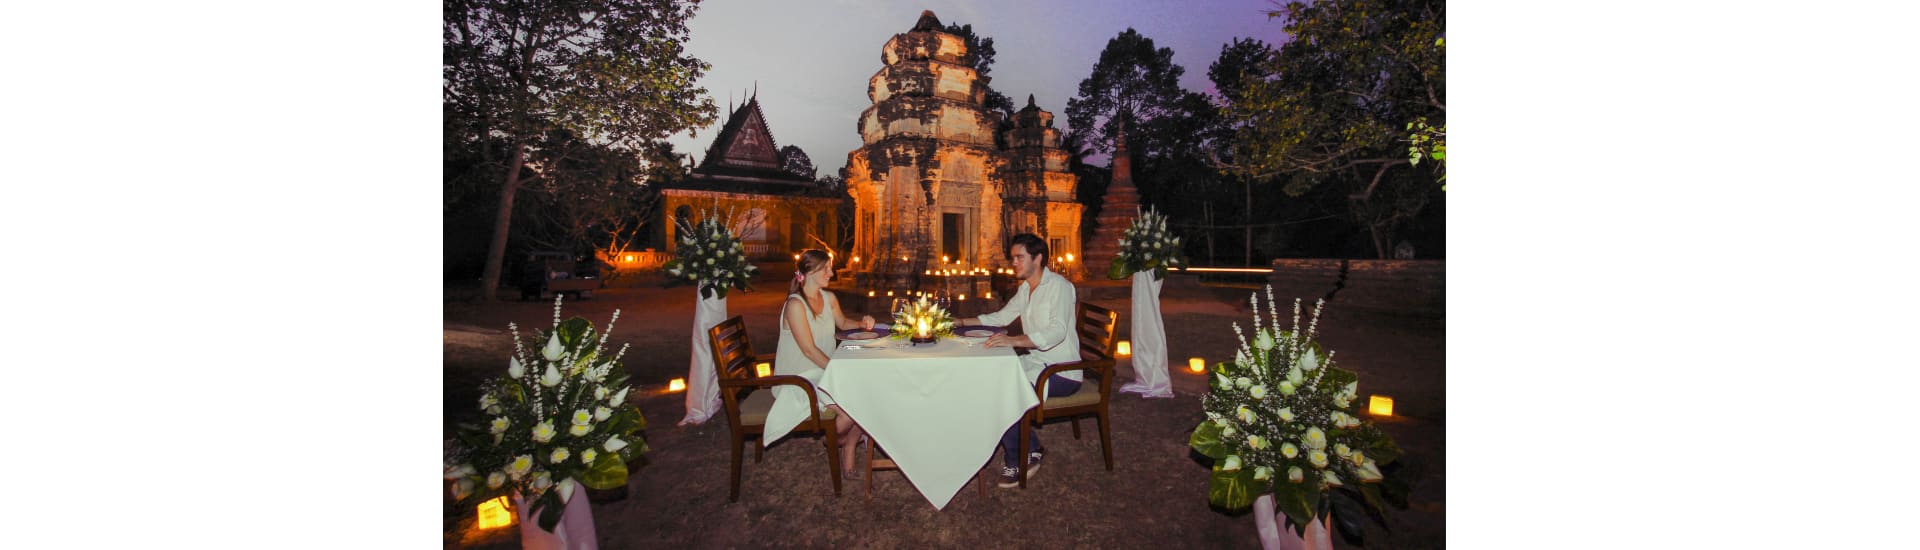 Anantara Angkor Resort takes its Dining by Design concept to new heights with new Temple Dining experience